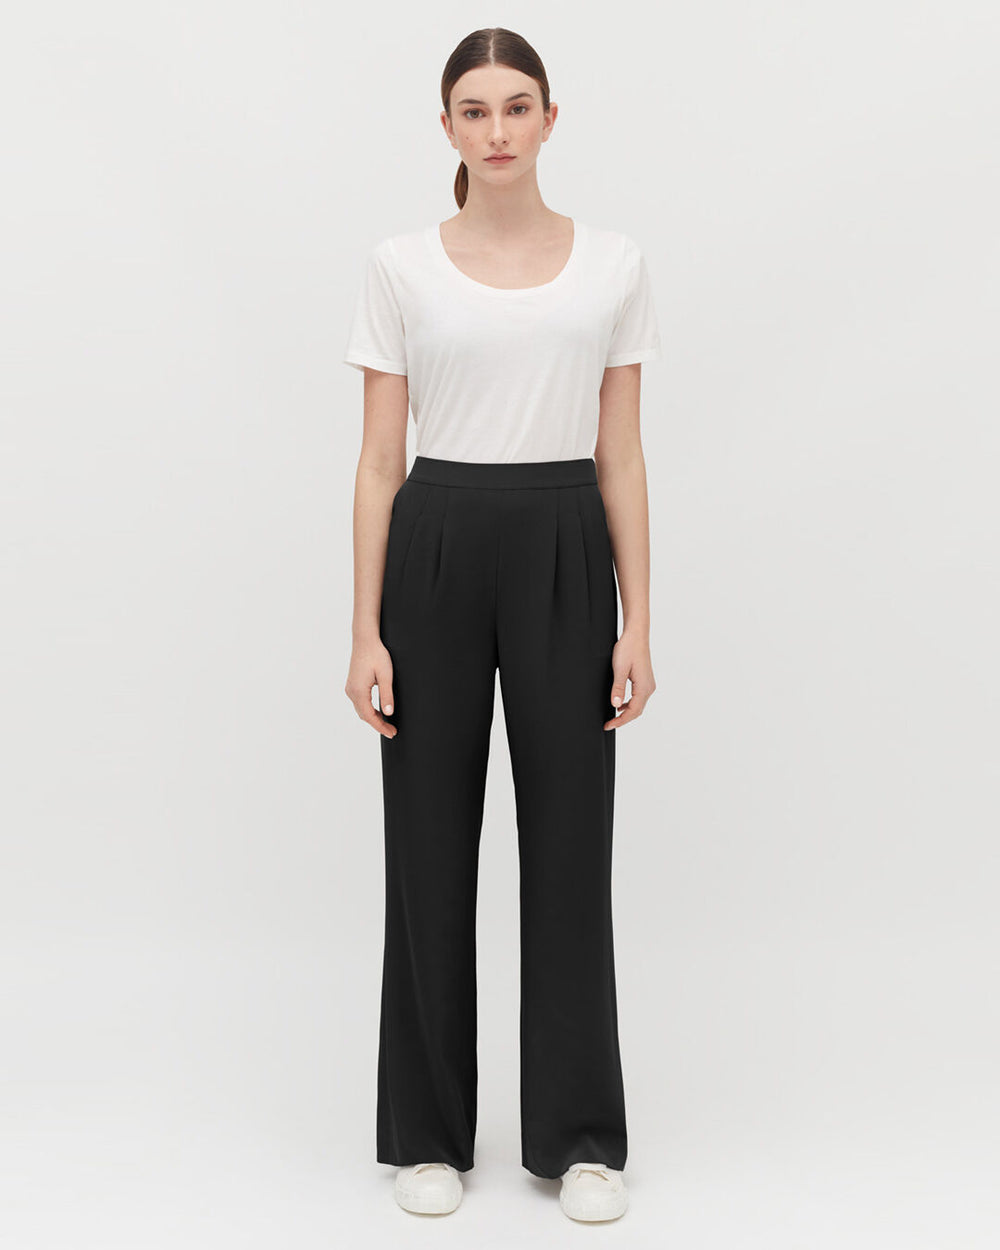 Black Pleated silk-satin wide-leg pants | Michael Lo Sordo #silk #trousers  #outfit #silktrousersoutfit Mi… | Silk pants outfit, Silk trousers outfit,  Classy outfits